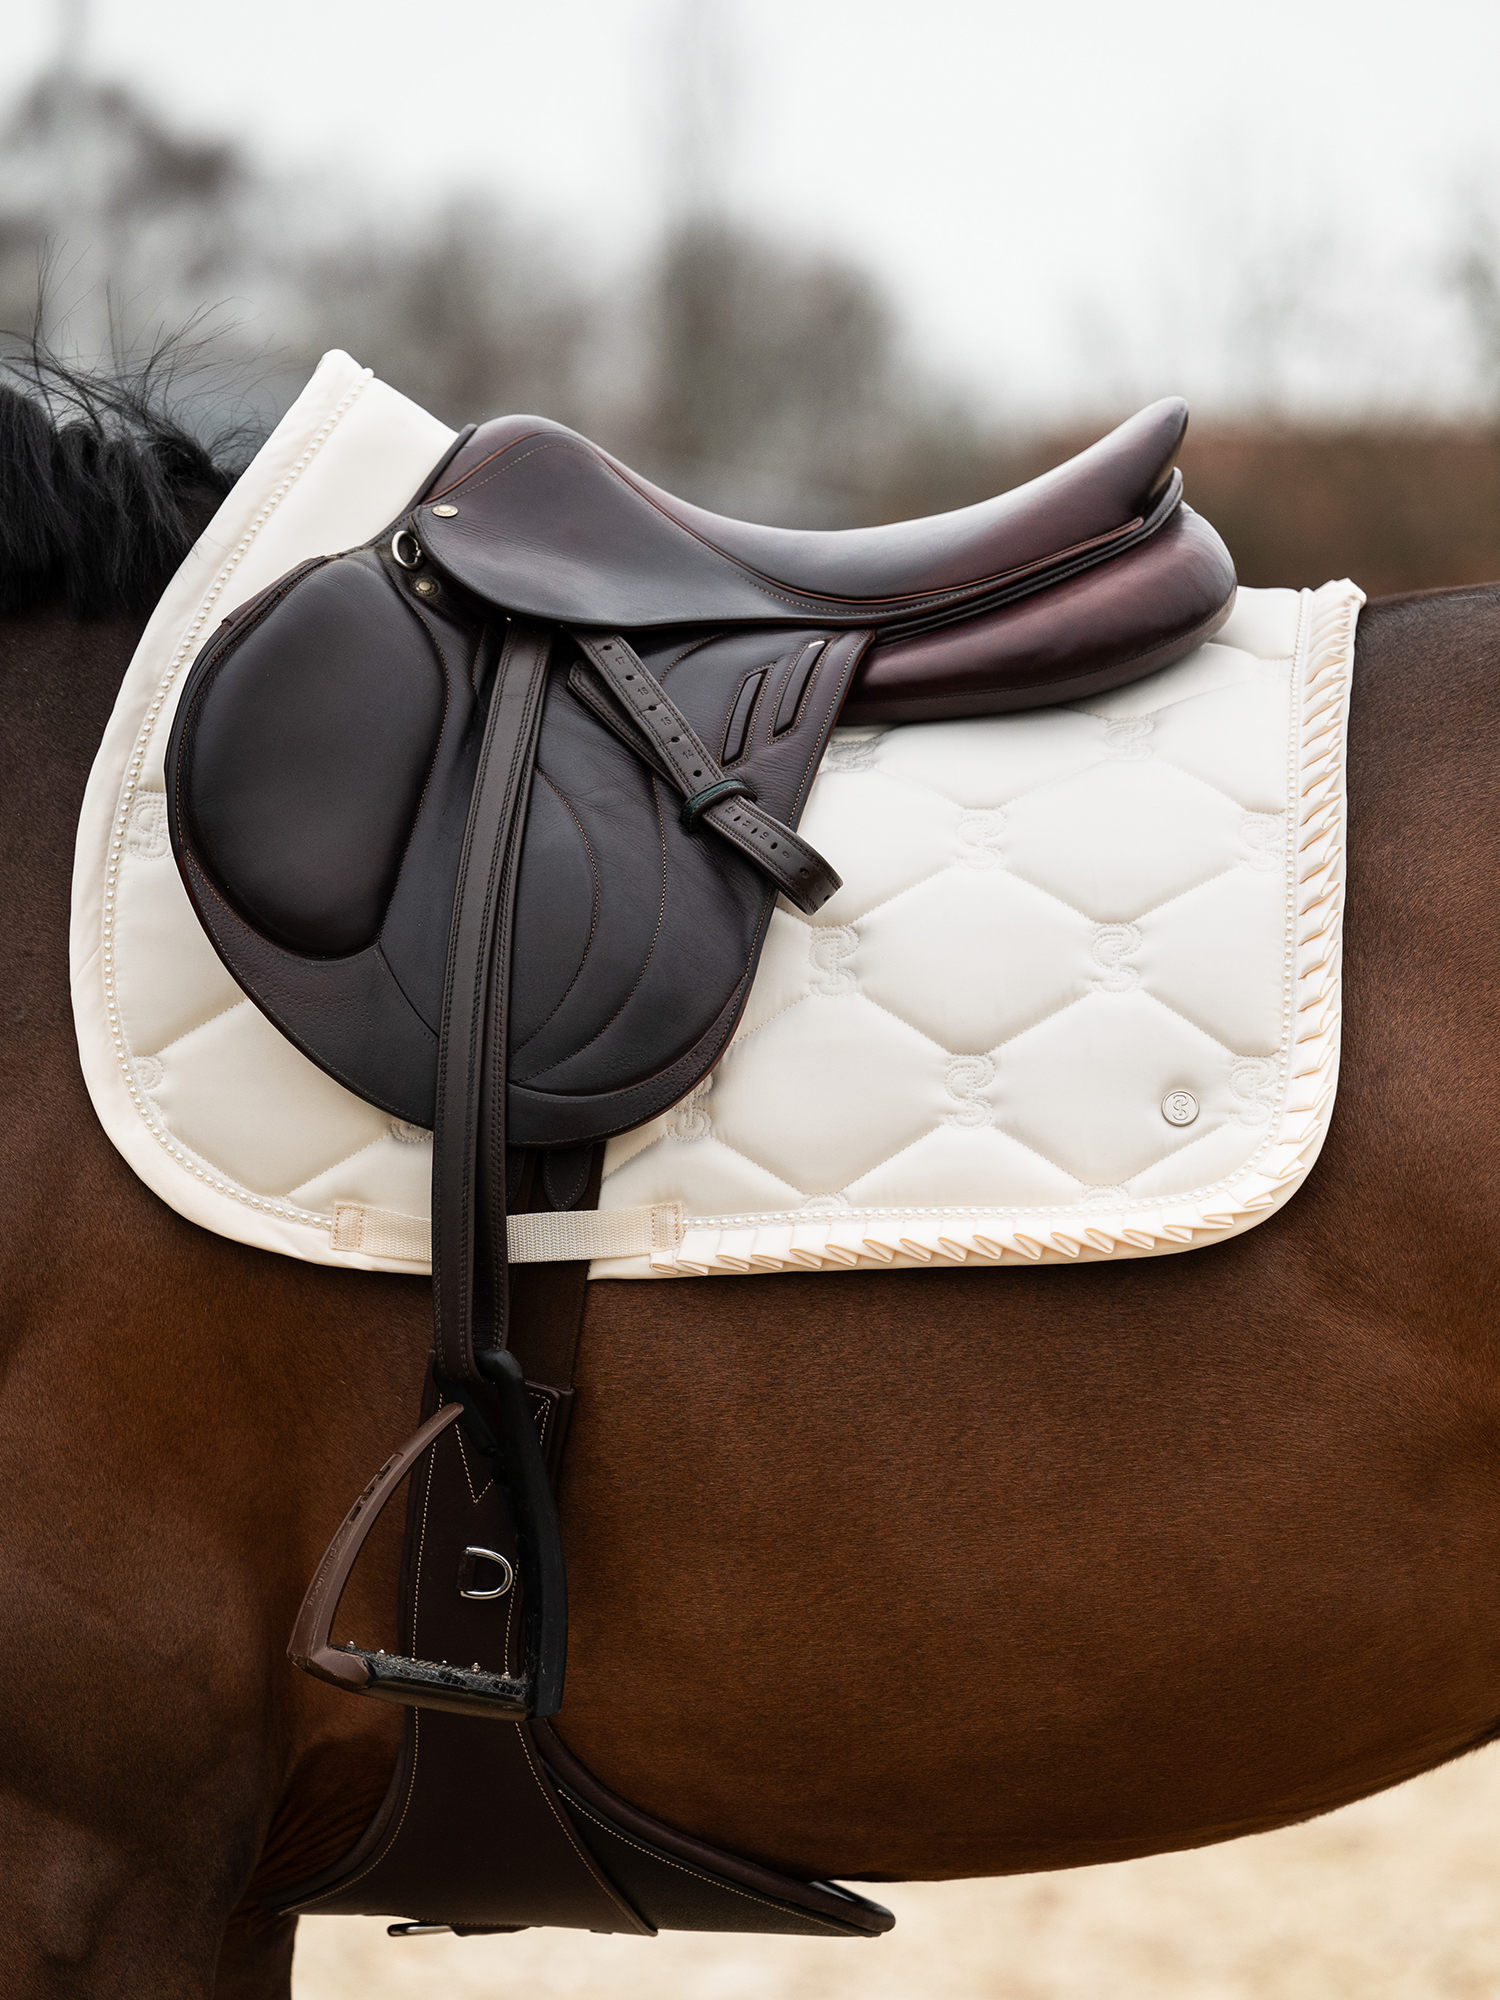 Equestrian quality products for both horses and riders • PS of 